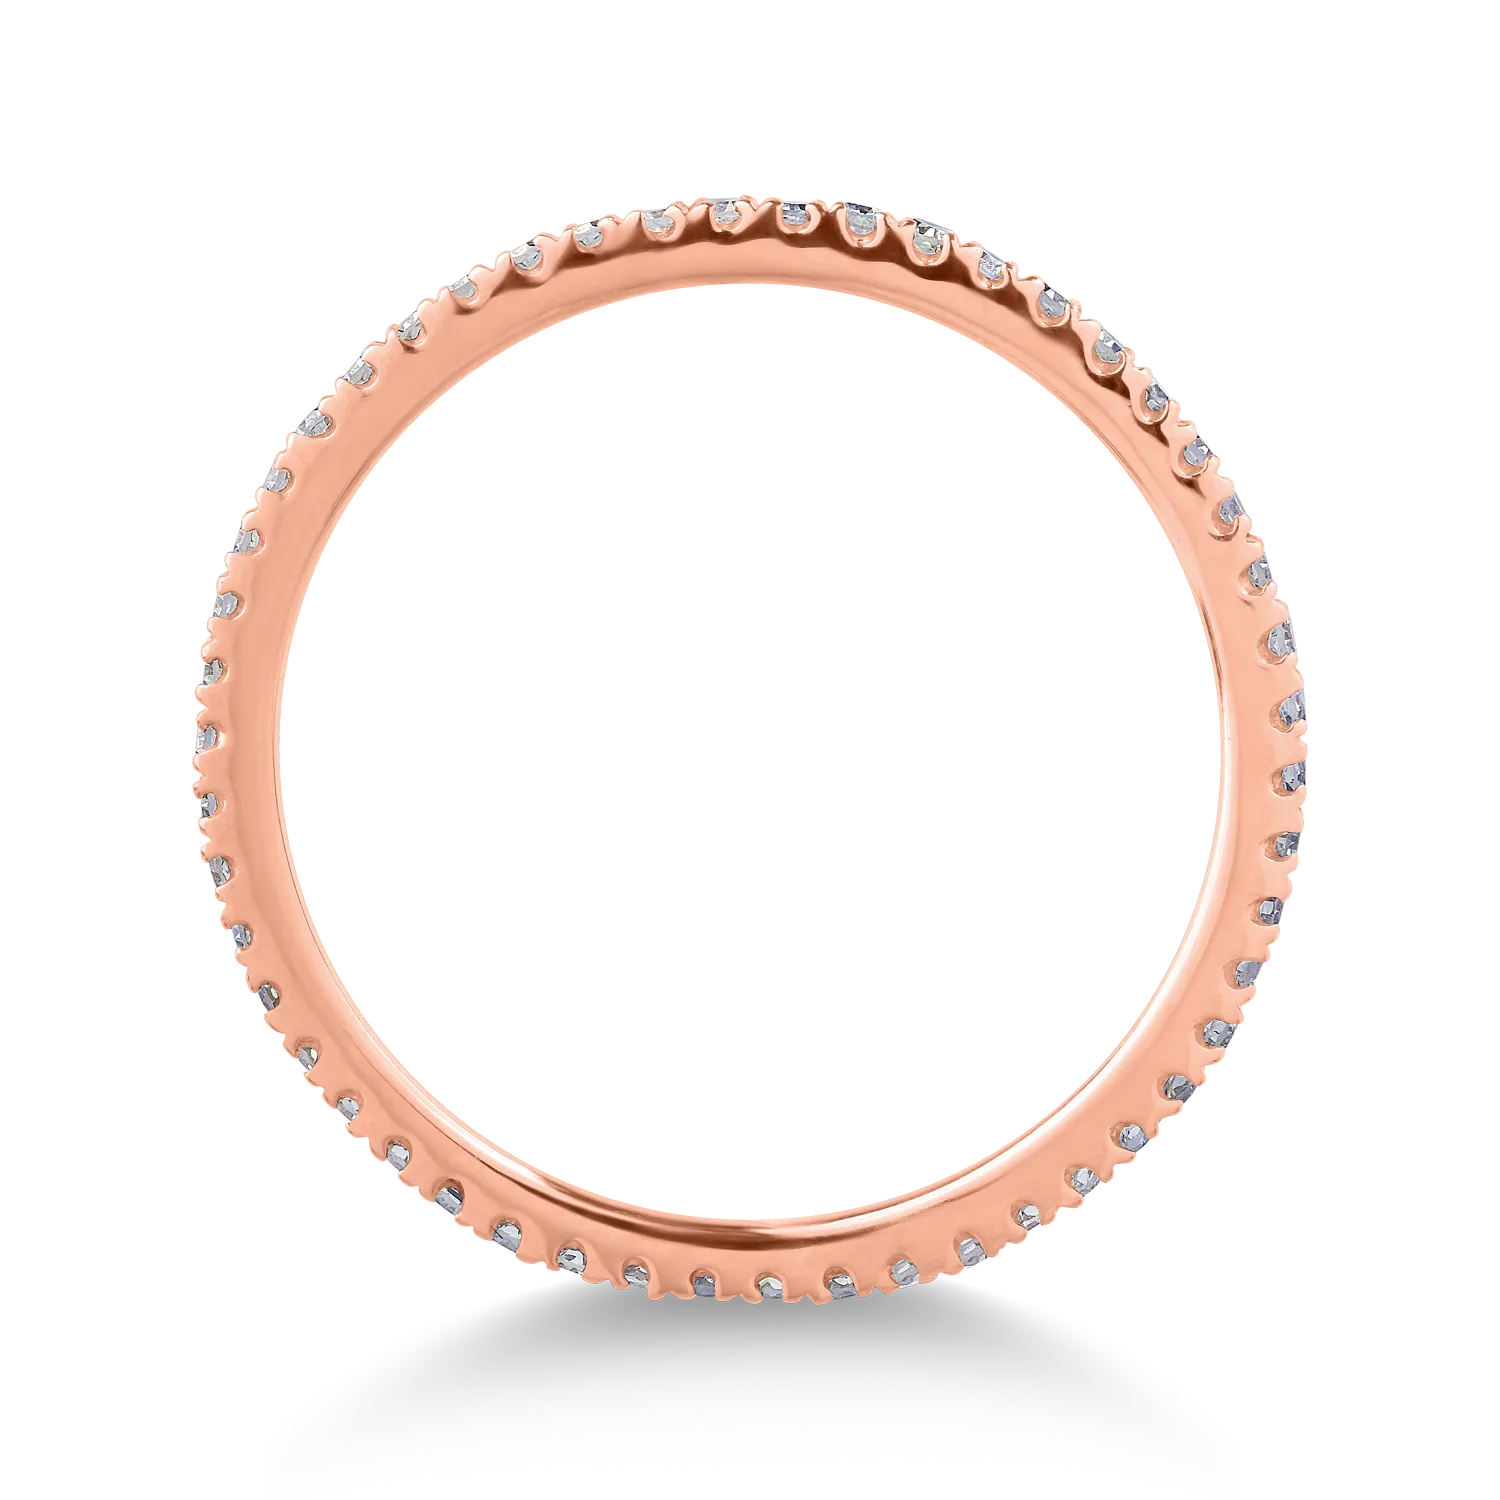 14K rose gold infinity ring with 0.25ct diamonds